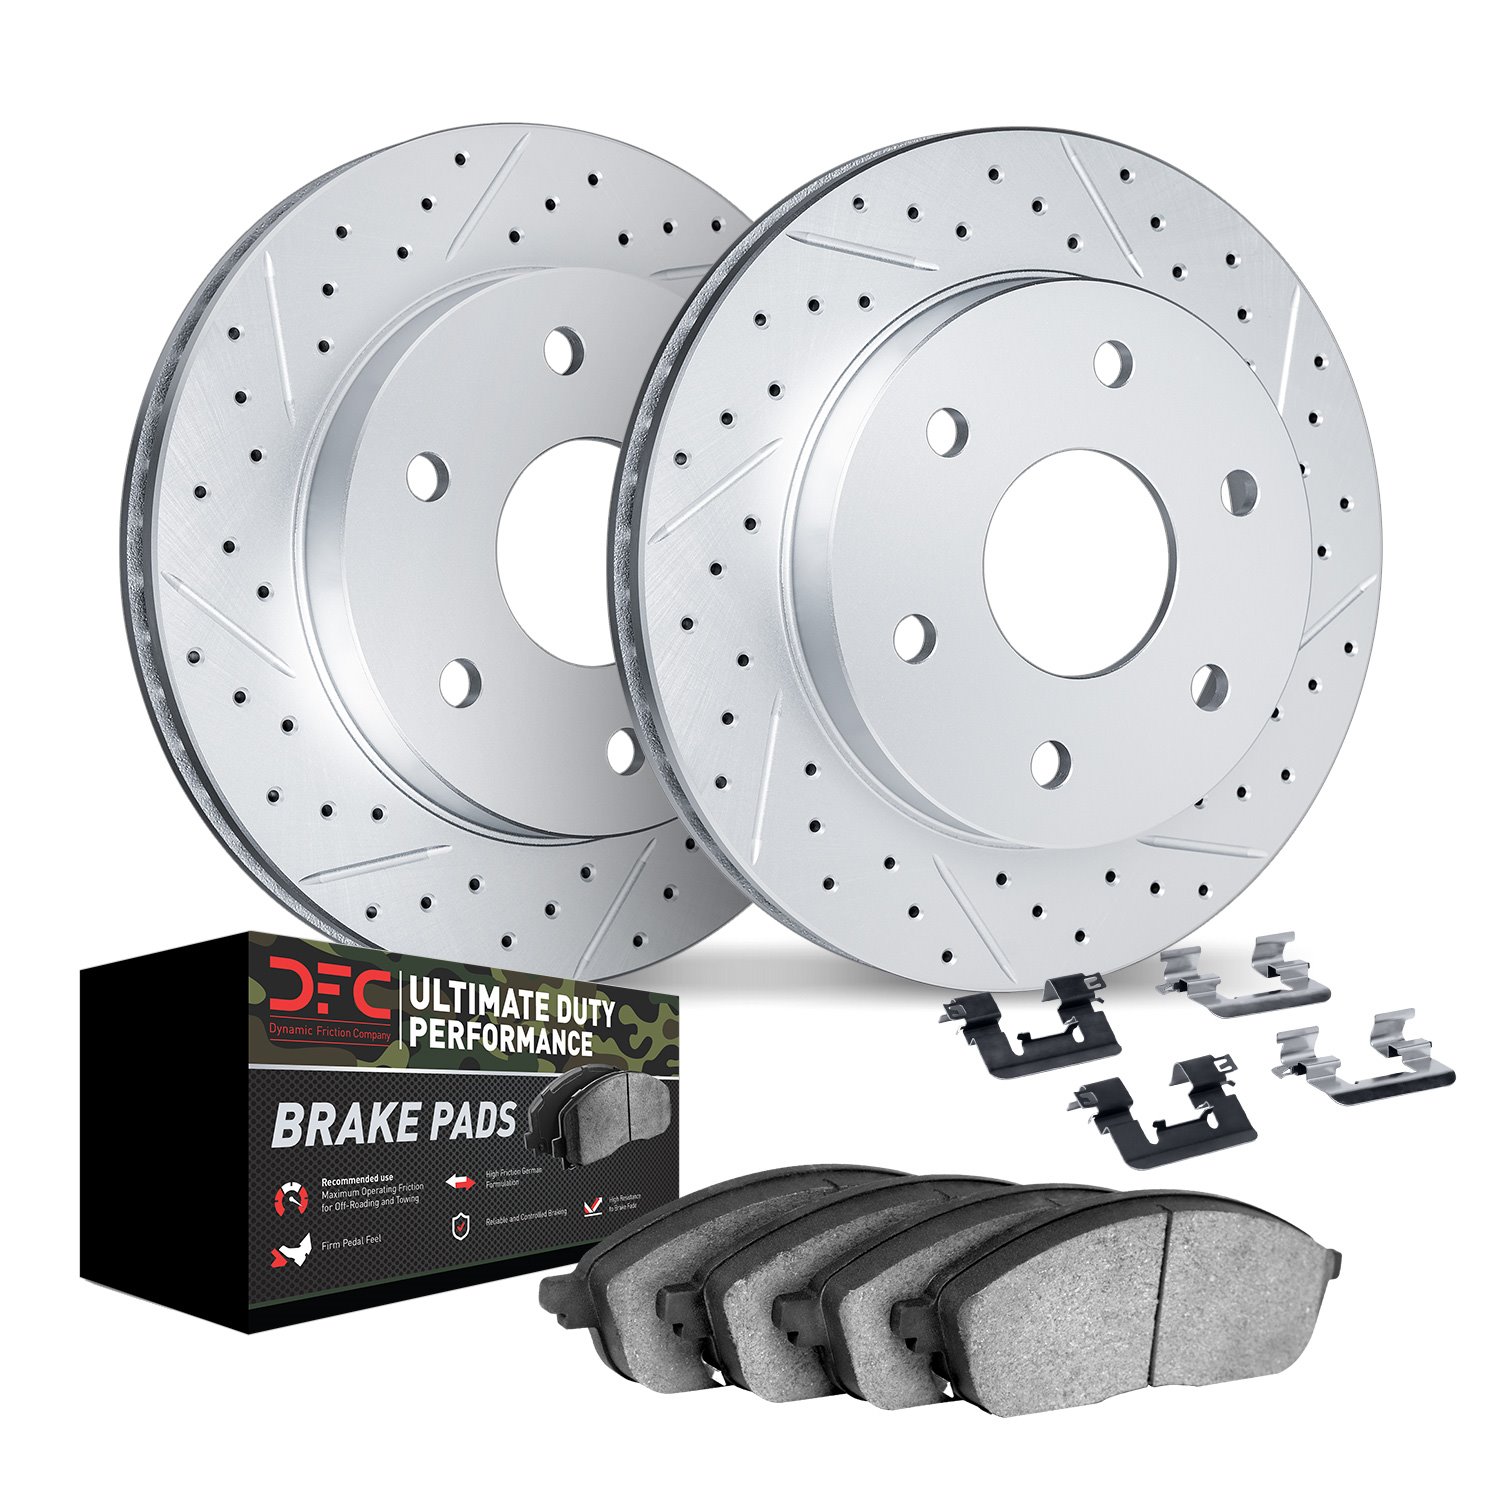 2412-54076 Geoperformance Drilled/Slotted Brake Rotors with Ultimate-Duty Brake Pads Kit & Hardware, 2015-2017 Ford/Lincoln/Merc